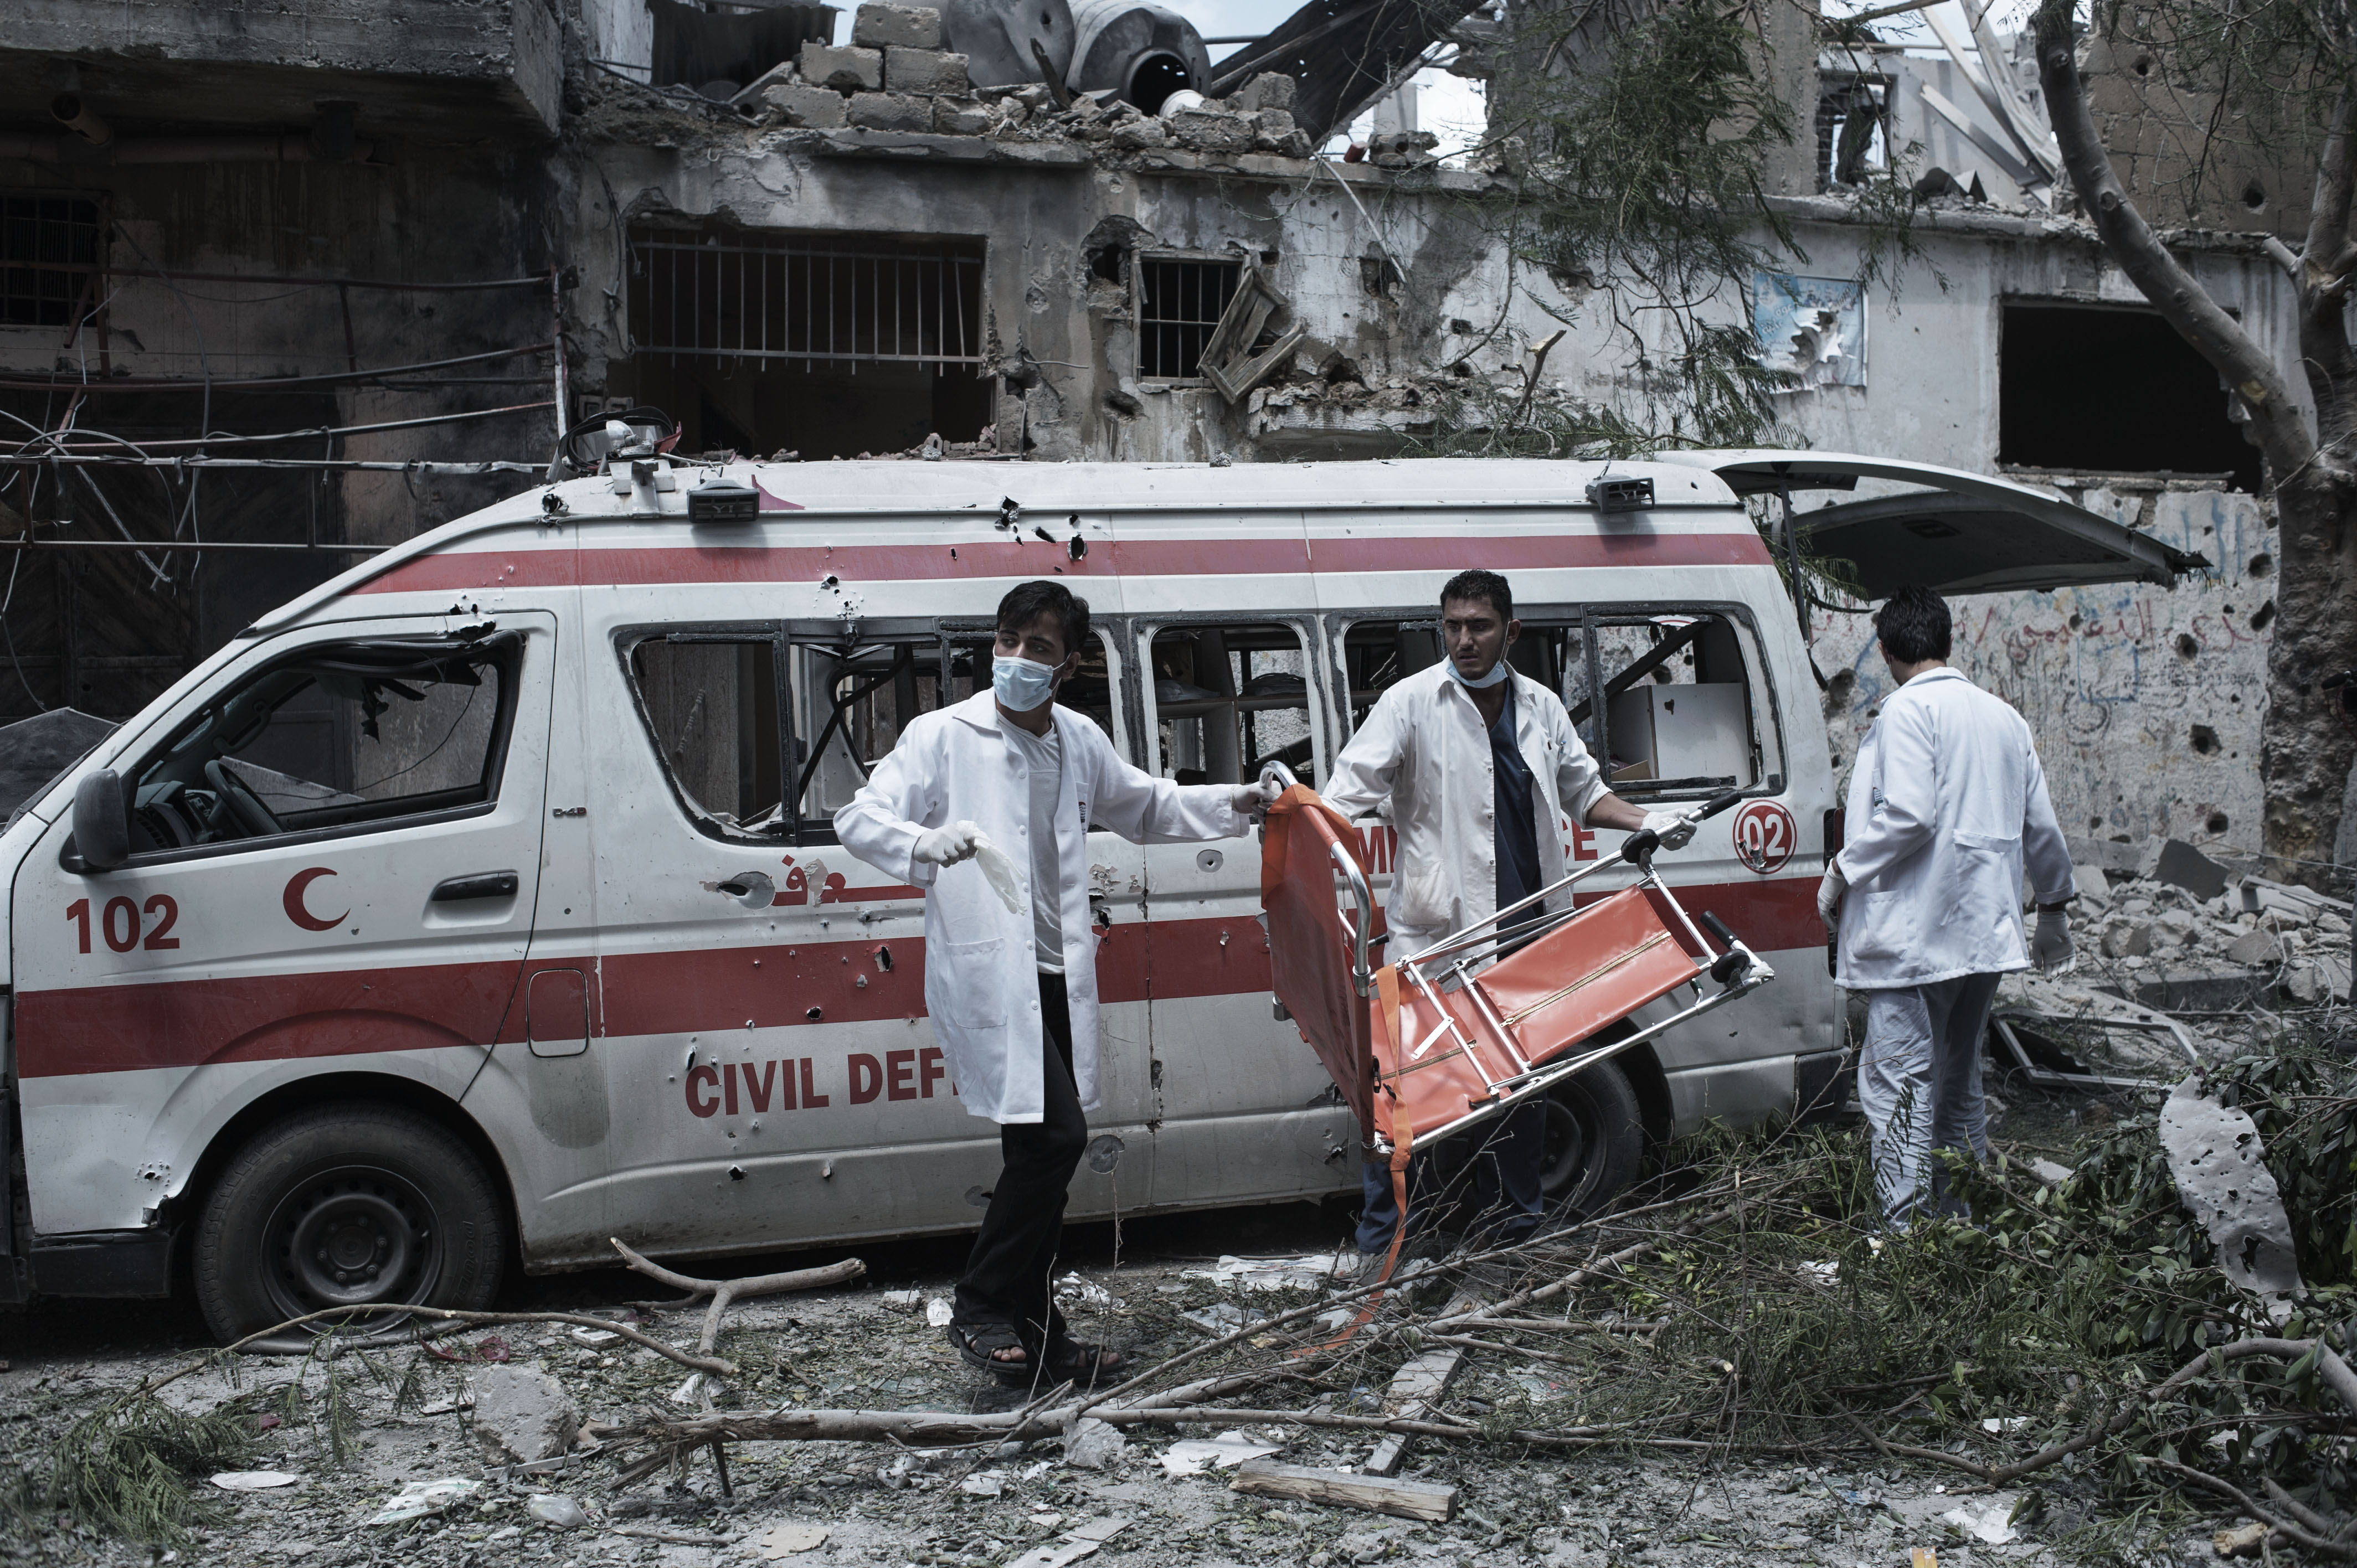 During a cease-fire, Palestinian medics look for survivors in Gaza's Shujaiyeh district after a night of Israeli heavy shelling on the neighborhood (Alessio Romenzi)